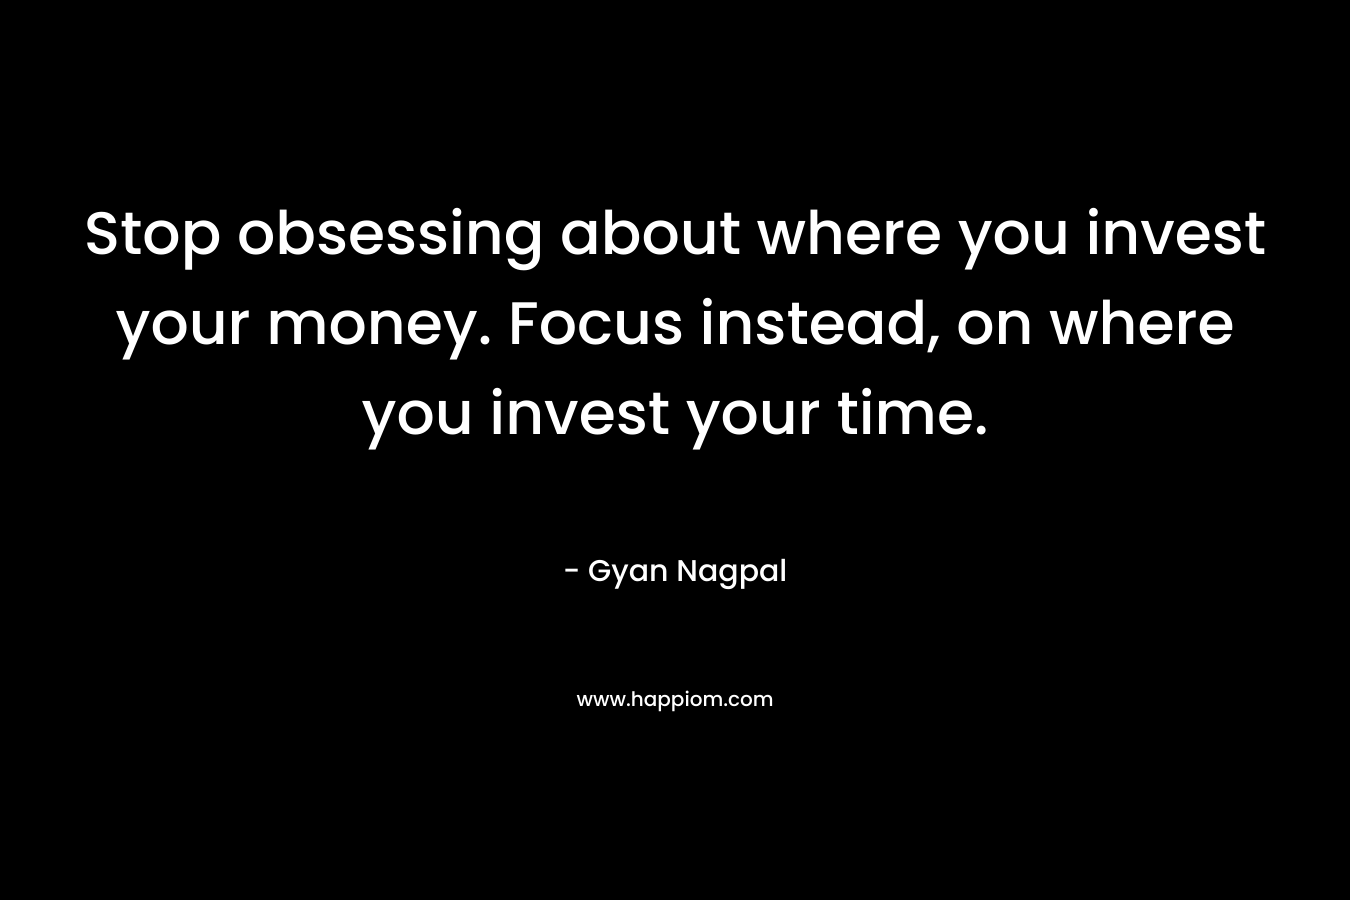 Stop obsessing about where you invest your money. Focus instead, on where you invest your time.